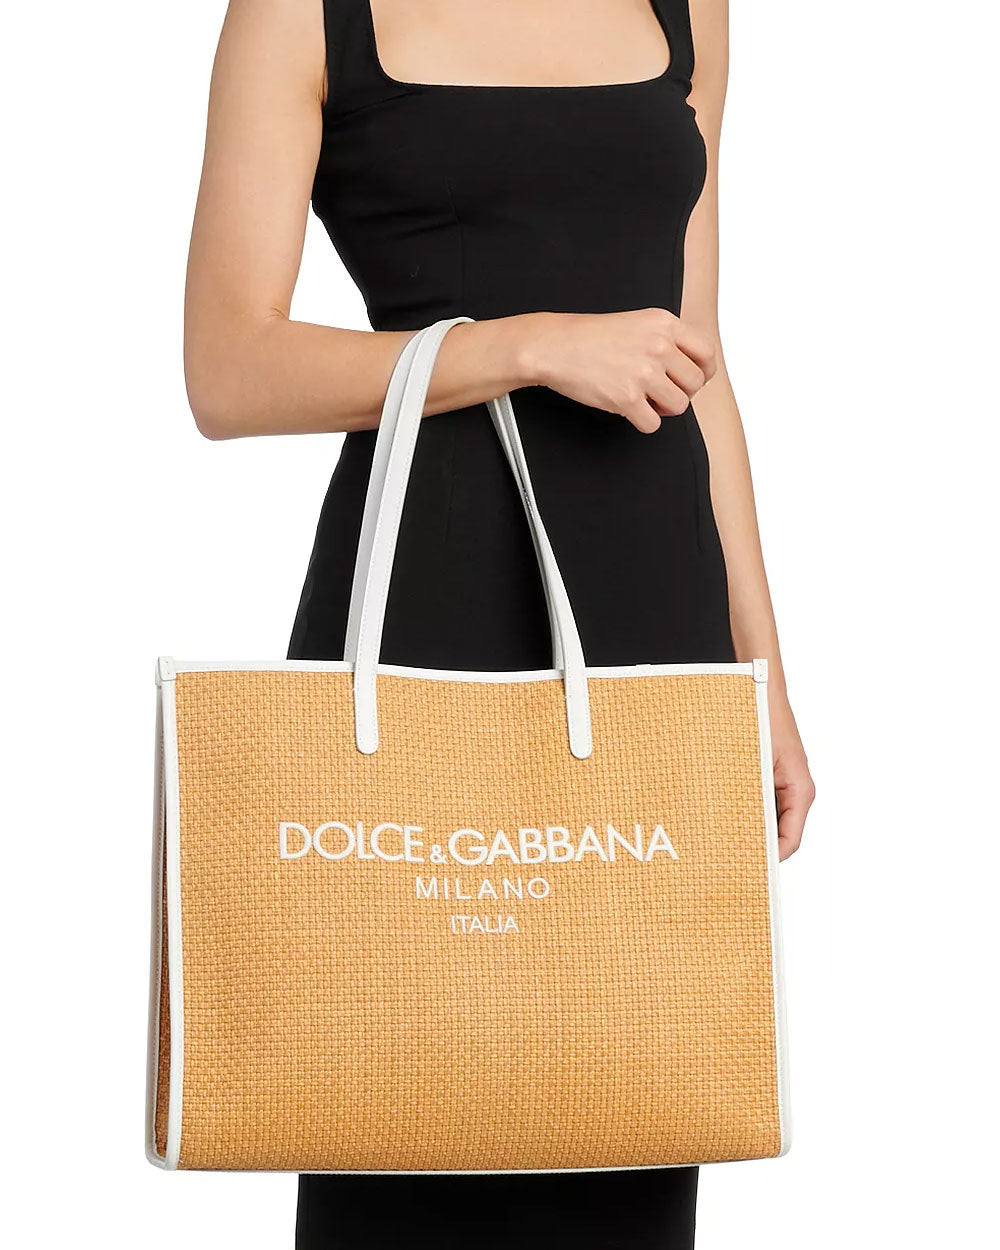 Woven Logo Tote in Natural